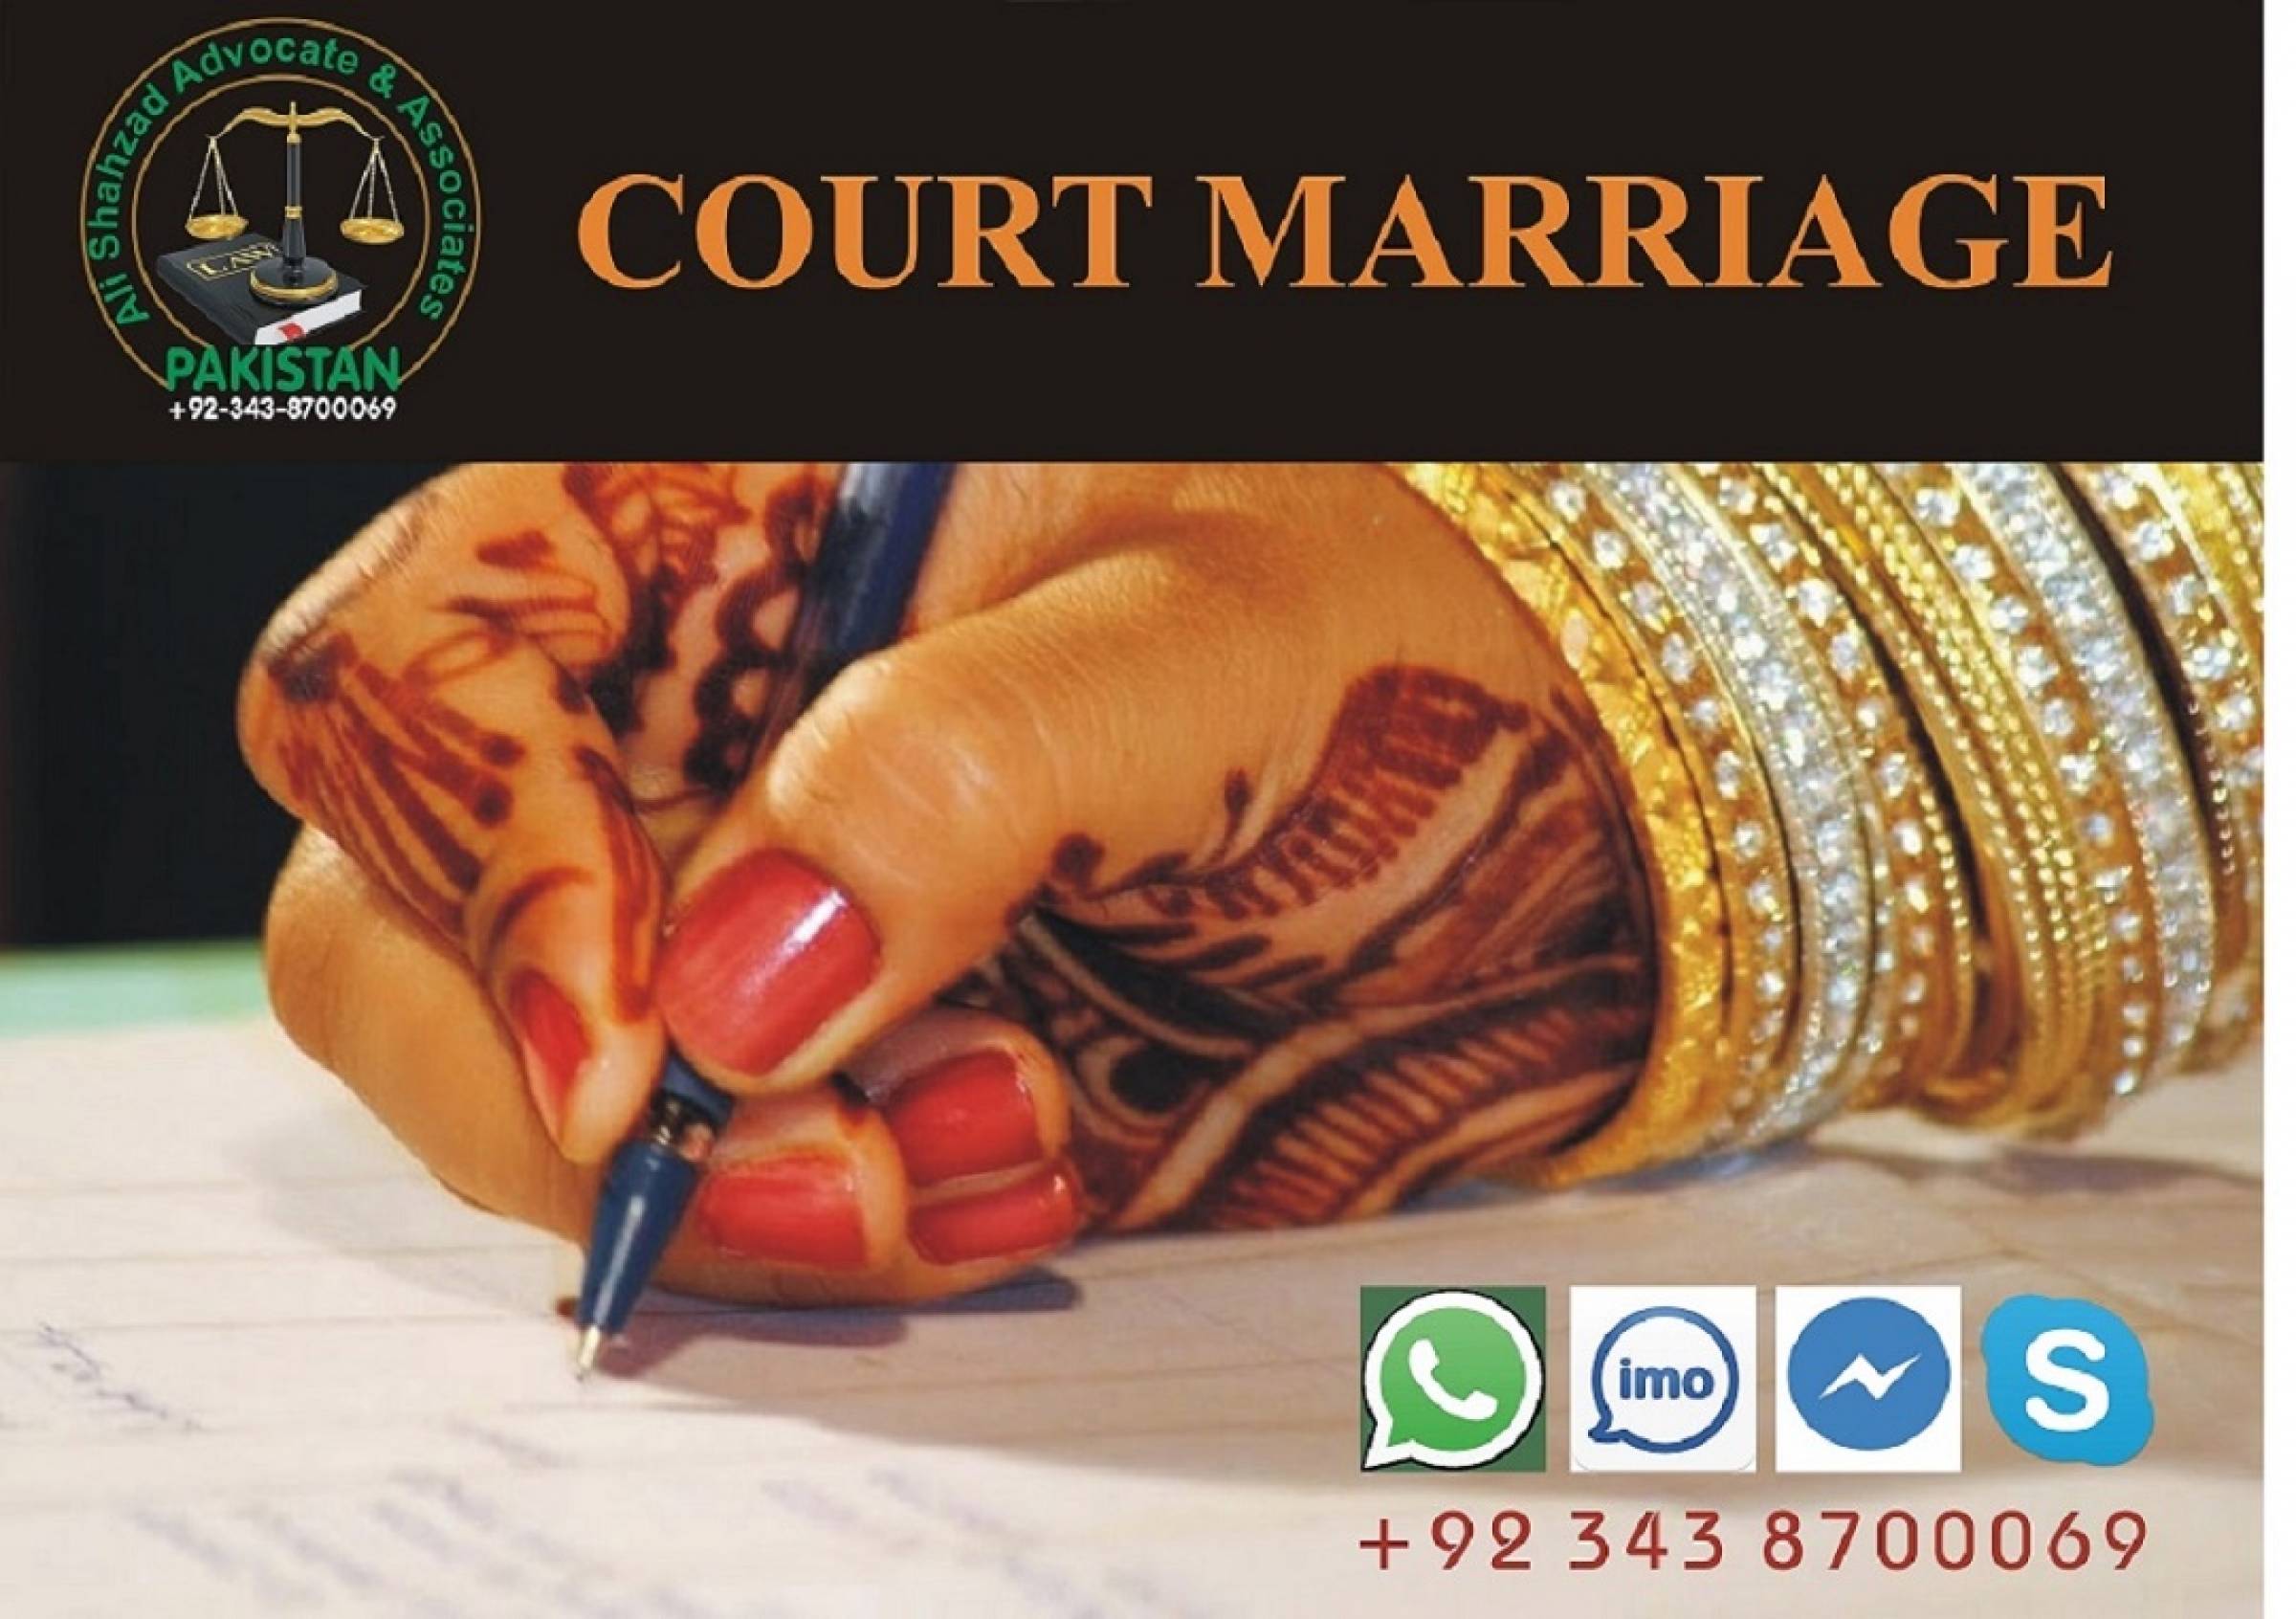 Court Marriage, Divorce, Family Cases Lawyer in Faisalabad Pakistan